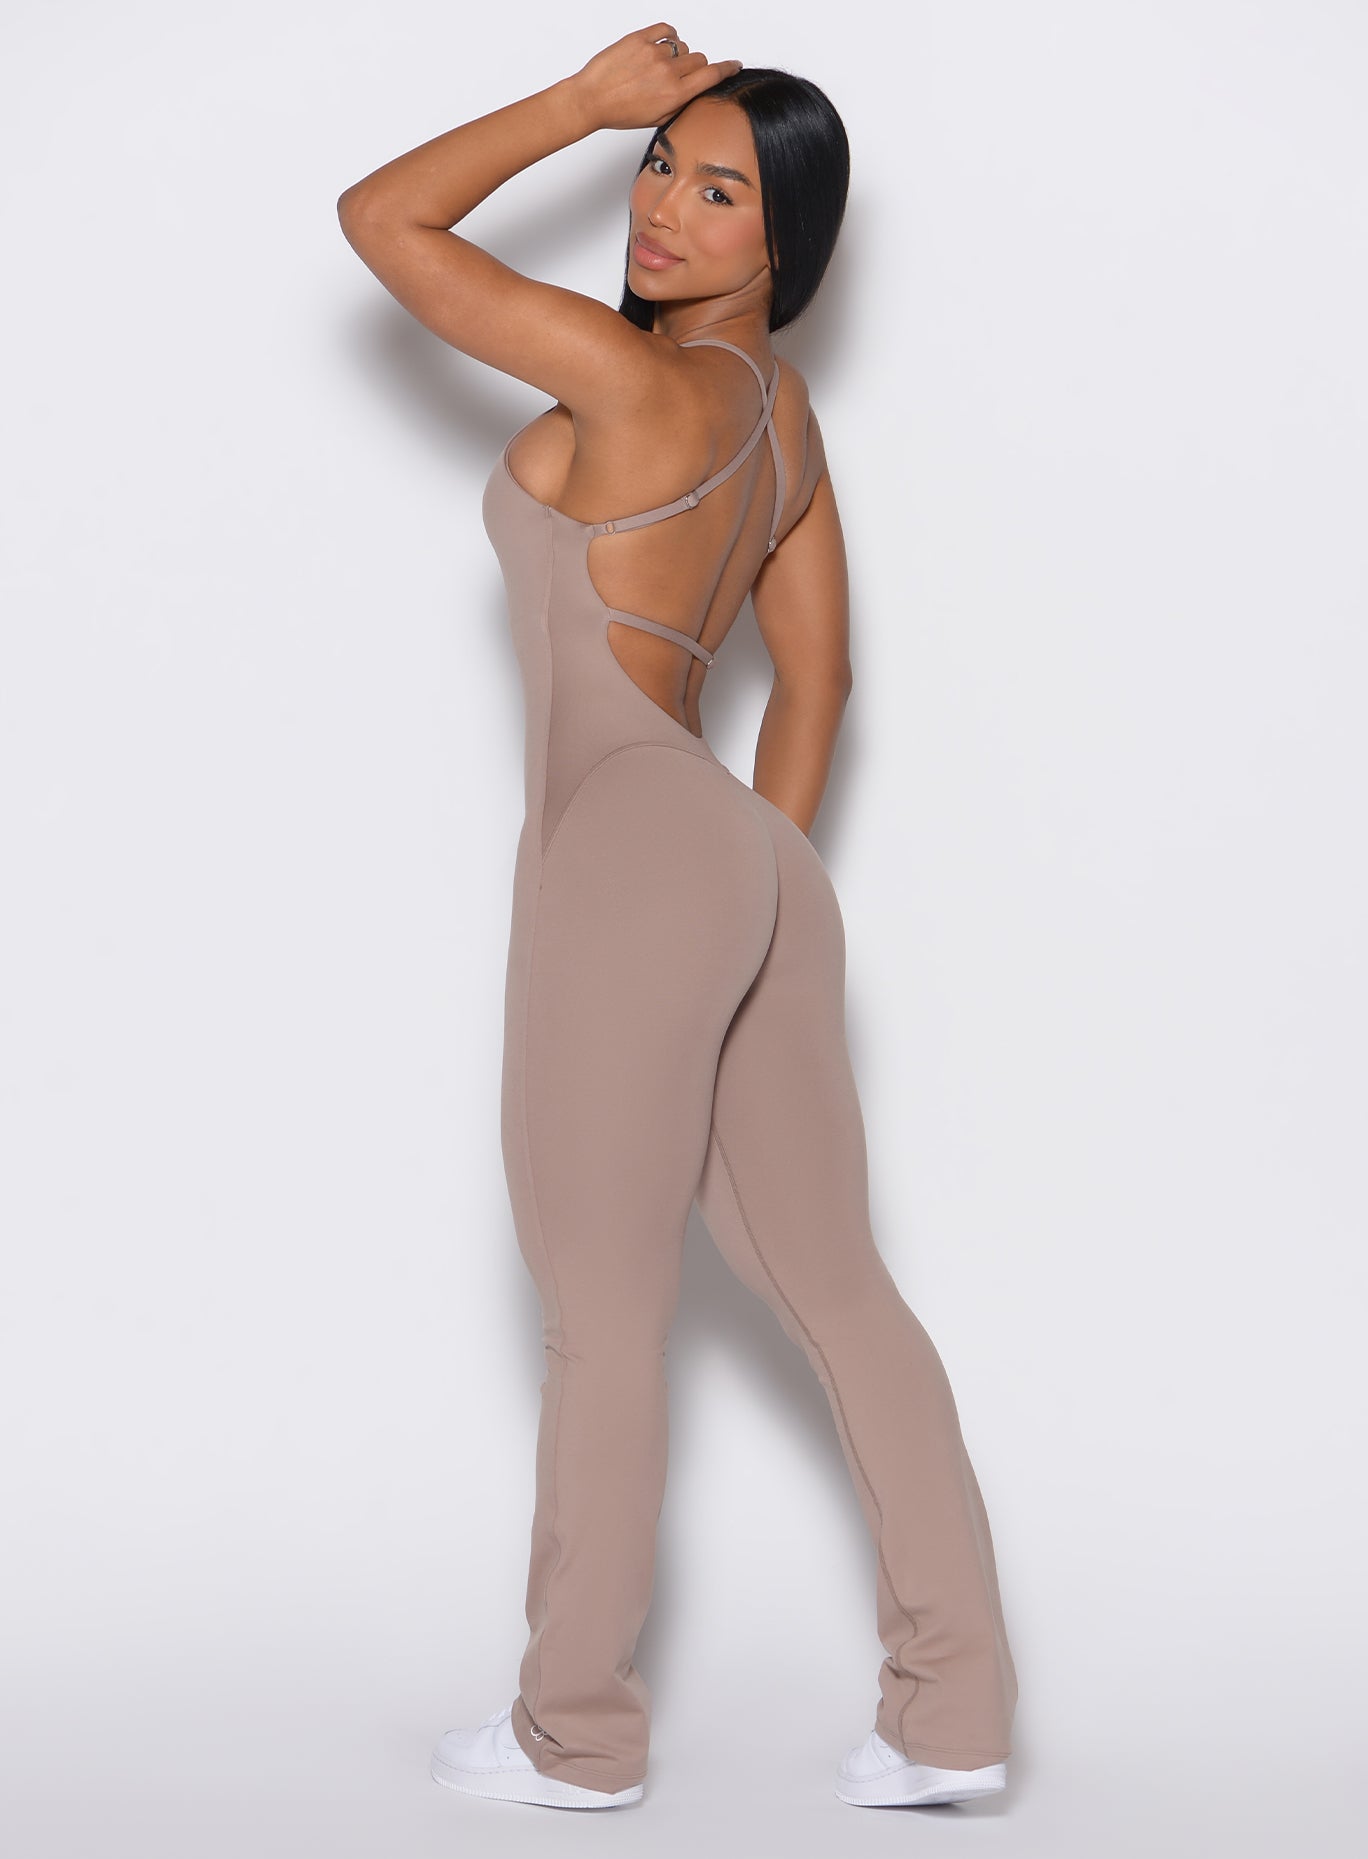 Left side profile view of a model touching her hair wearing the Bombshell Bunny Bodysuit in Clay color.